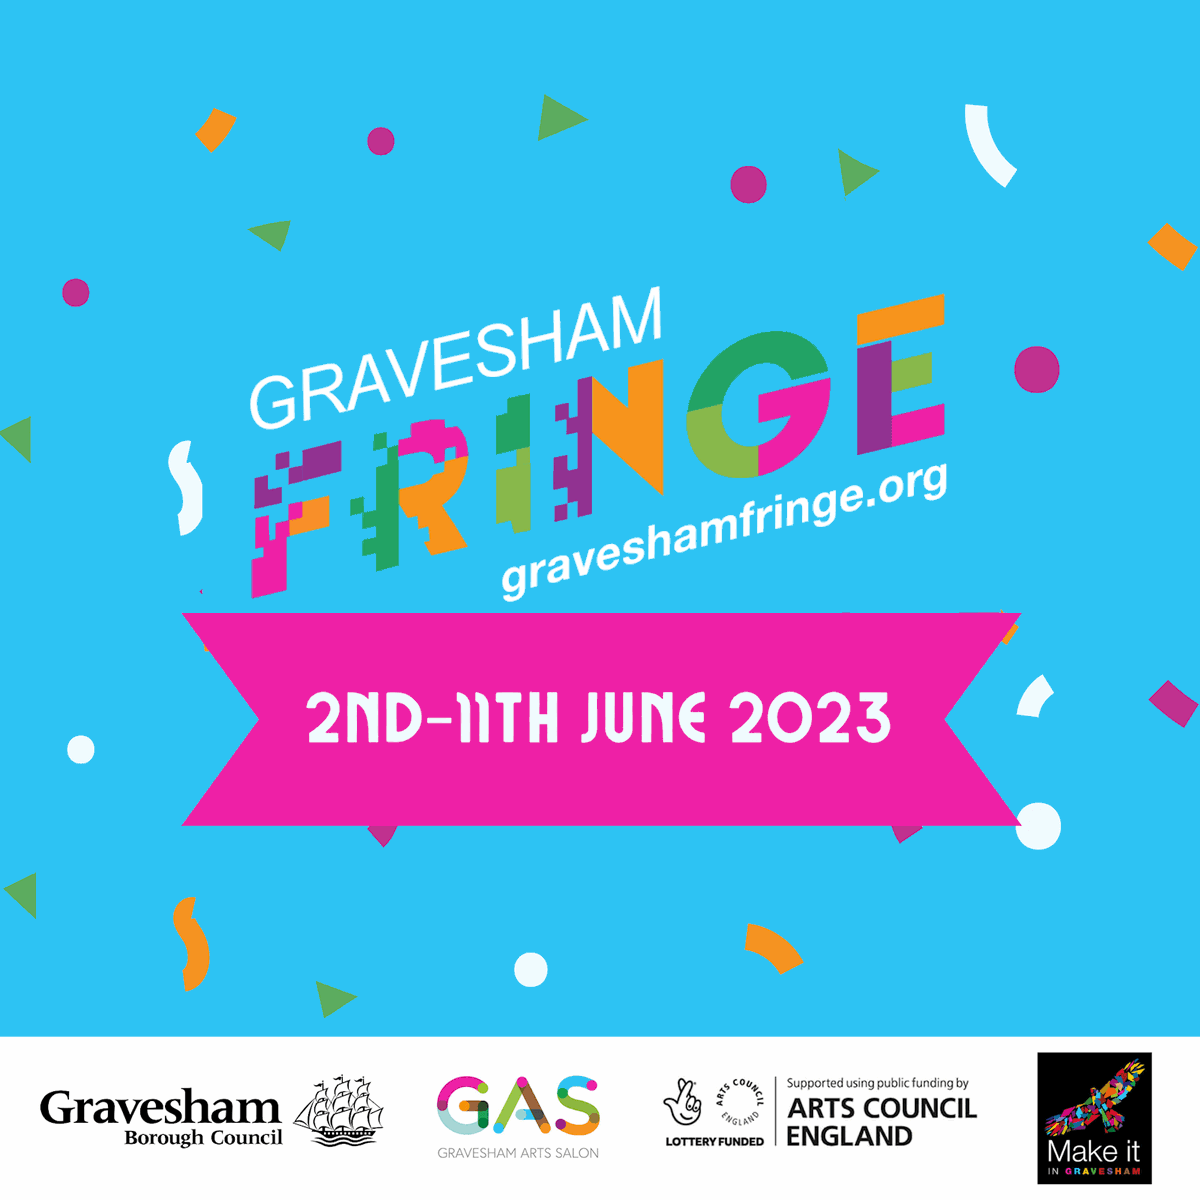 Woohoo, really loved delivering #LaughterYoga and #AfricanDance as part of the #GraveshamFringeFestival check out the website for more events graveshamfringe.org #gravesham #kent